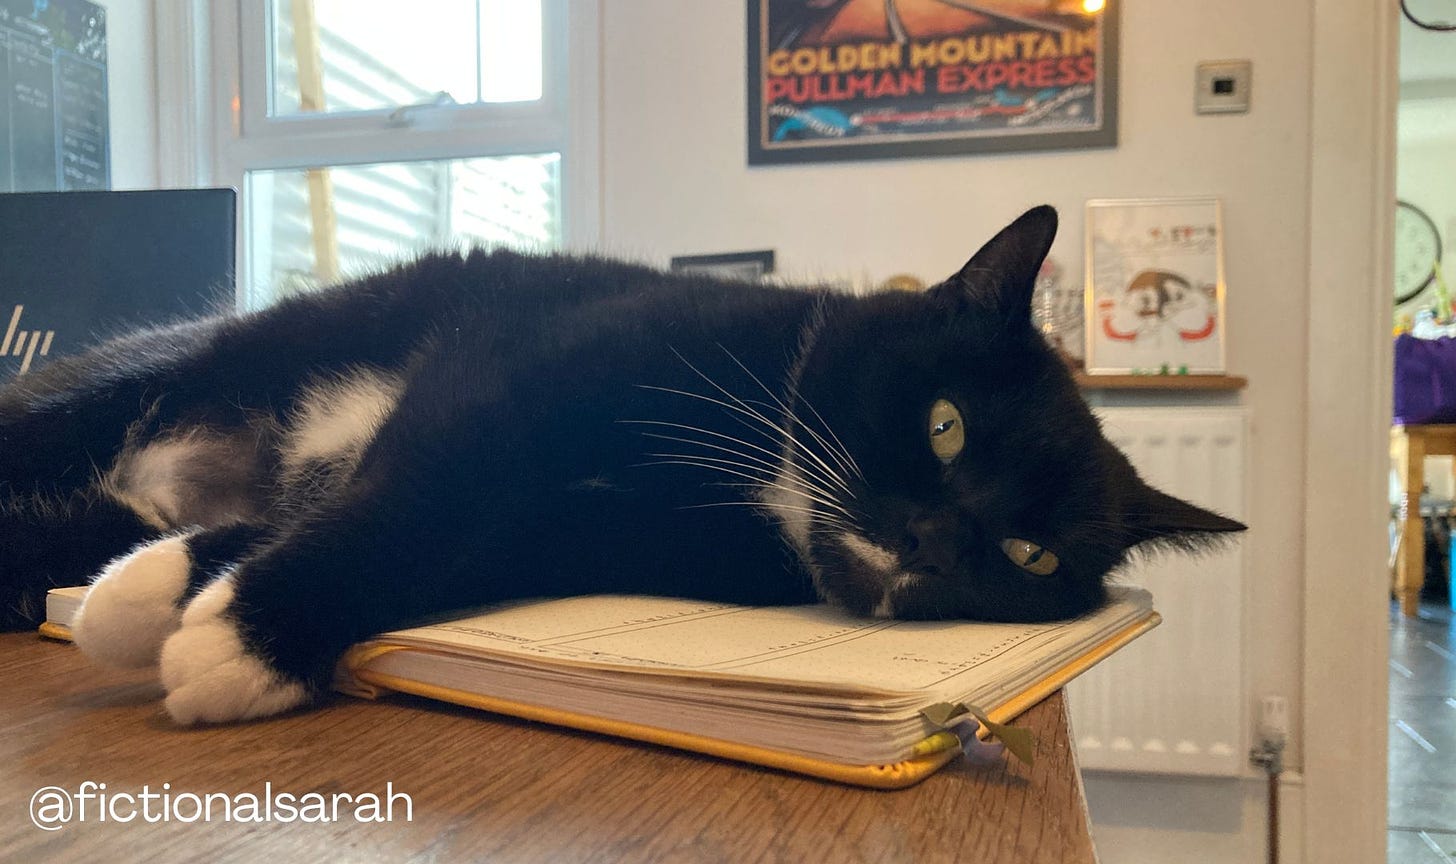 Willow the black and white anti work cat flopped dramatically on her side on top of my bullet journal. She's making sure I can't work, while also begging me for attention. Spoiler: she is not attention starved at all. 